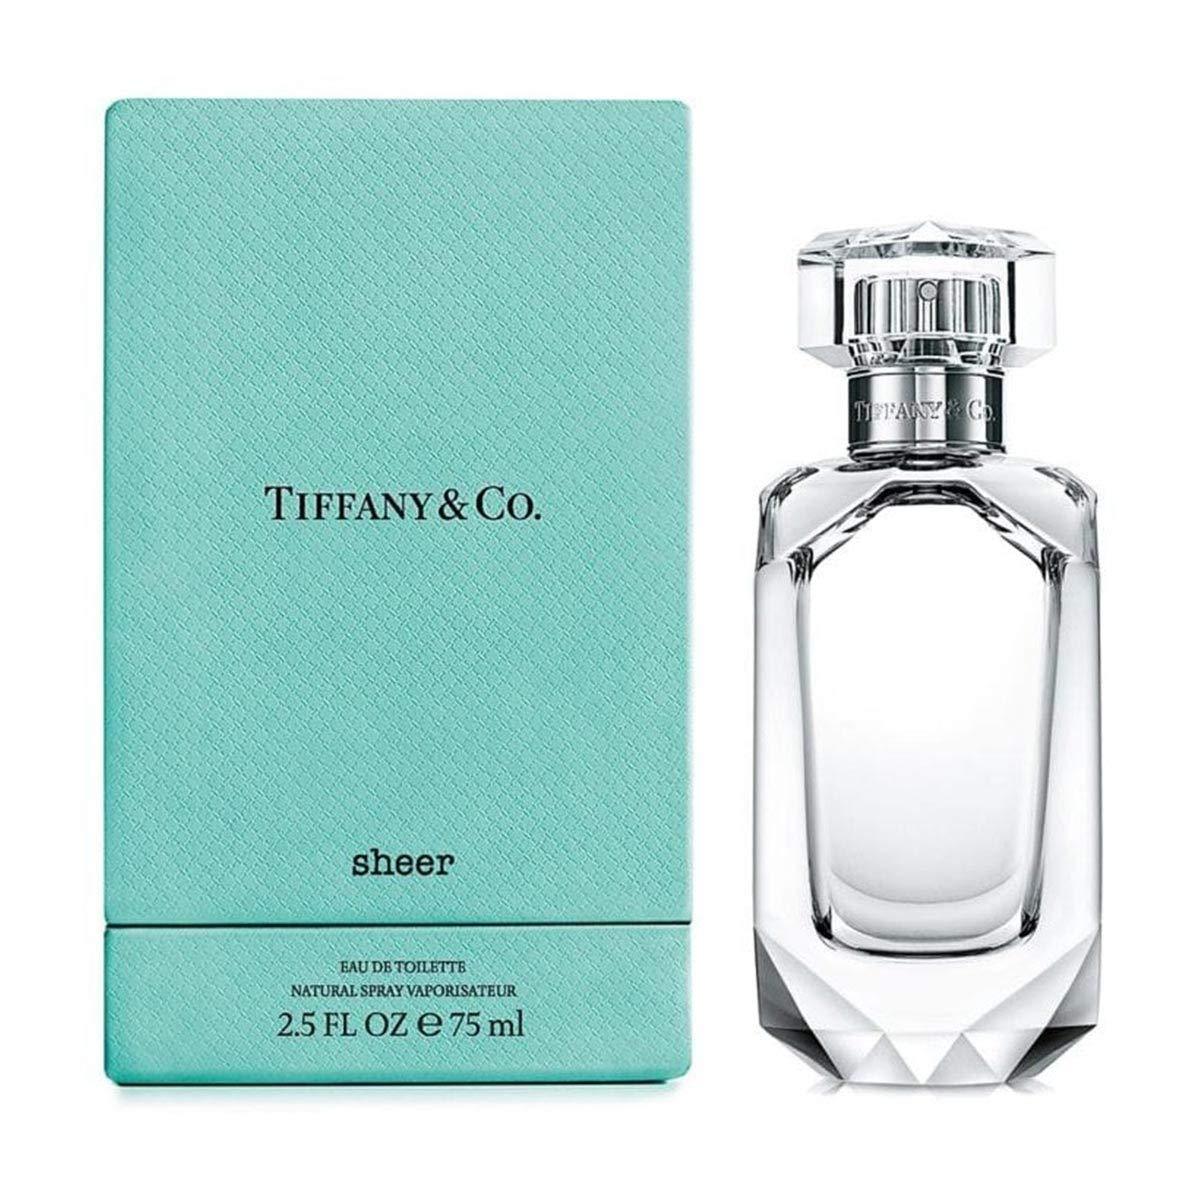 Elegantly wrapped in top notes of black currant, vert de mandarine and ylang-ylang, Tiffany Sheer beautifully blends with rose oil and finishes with an iris base. Crafted by world-renowned Givaudan perfumer Daniela Andrier, the multifaceted structure is playful yet elegant. The aromatic equivalence of a diamond in its purest form, Tiffany Sheer is a subtle luxury for the skin. Unique and timeless, it is a pure expression of joy and love.

Style: Floral.

Notes:

- Top: blackcurrant.

- Middle: ylang-ylang.

- Base: iris.